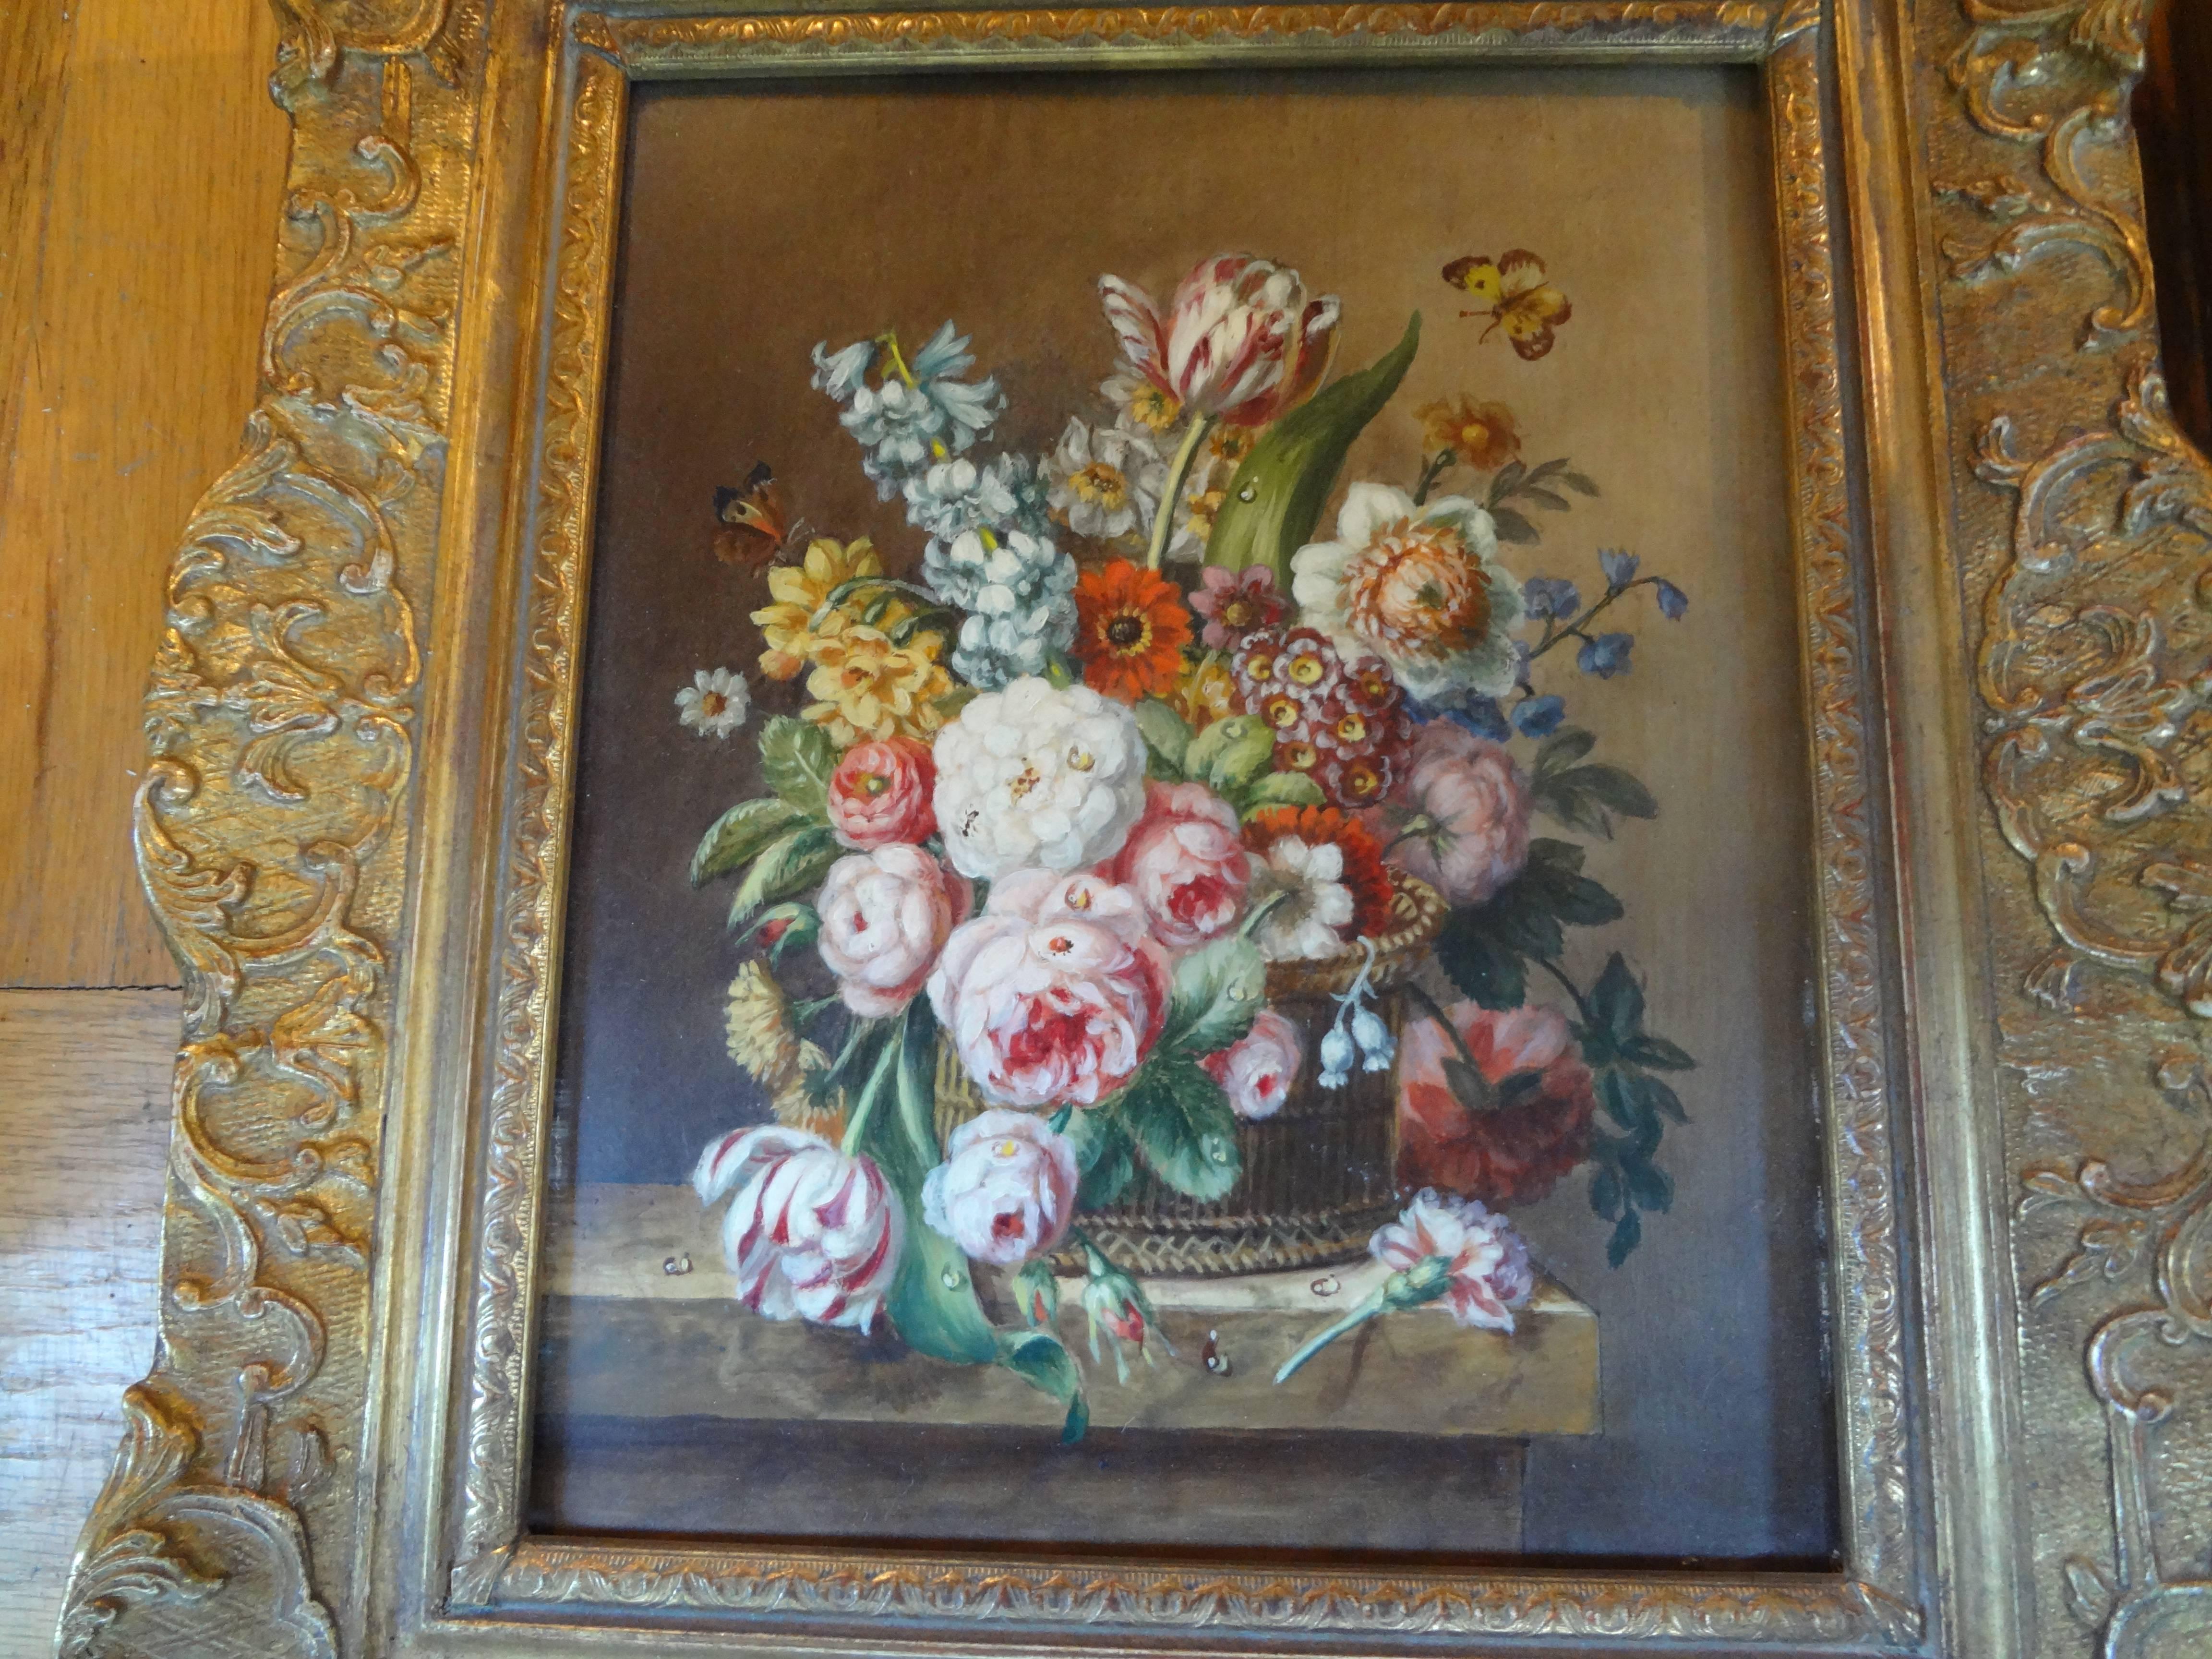 Pair of antique French framed floral oil paintings.
Well executed pair of antique French floral oil paintings on wood in giltwood frames, circa 1920 or earlier. These beautiful 18th century style complimentary decorative antique oil paintings are in